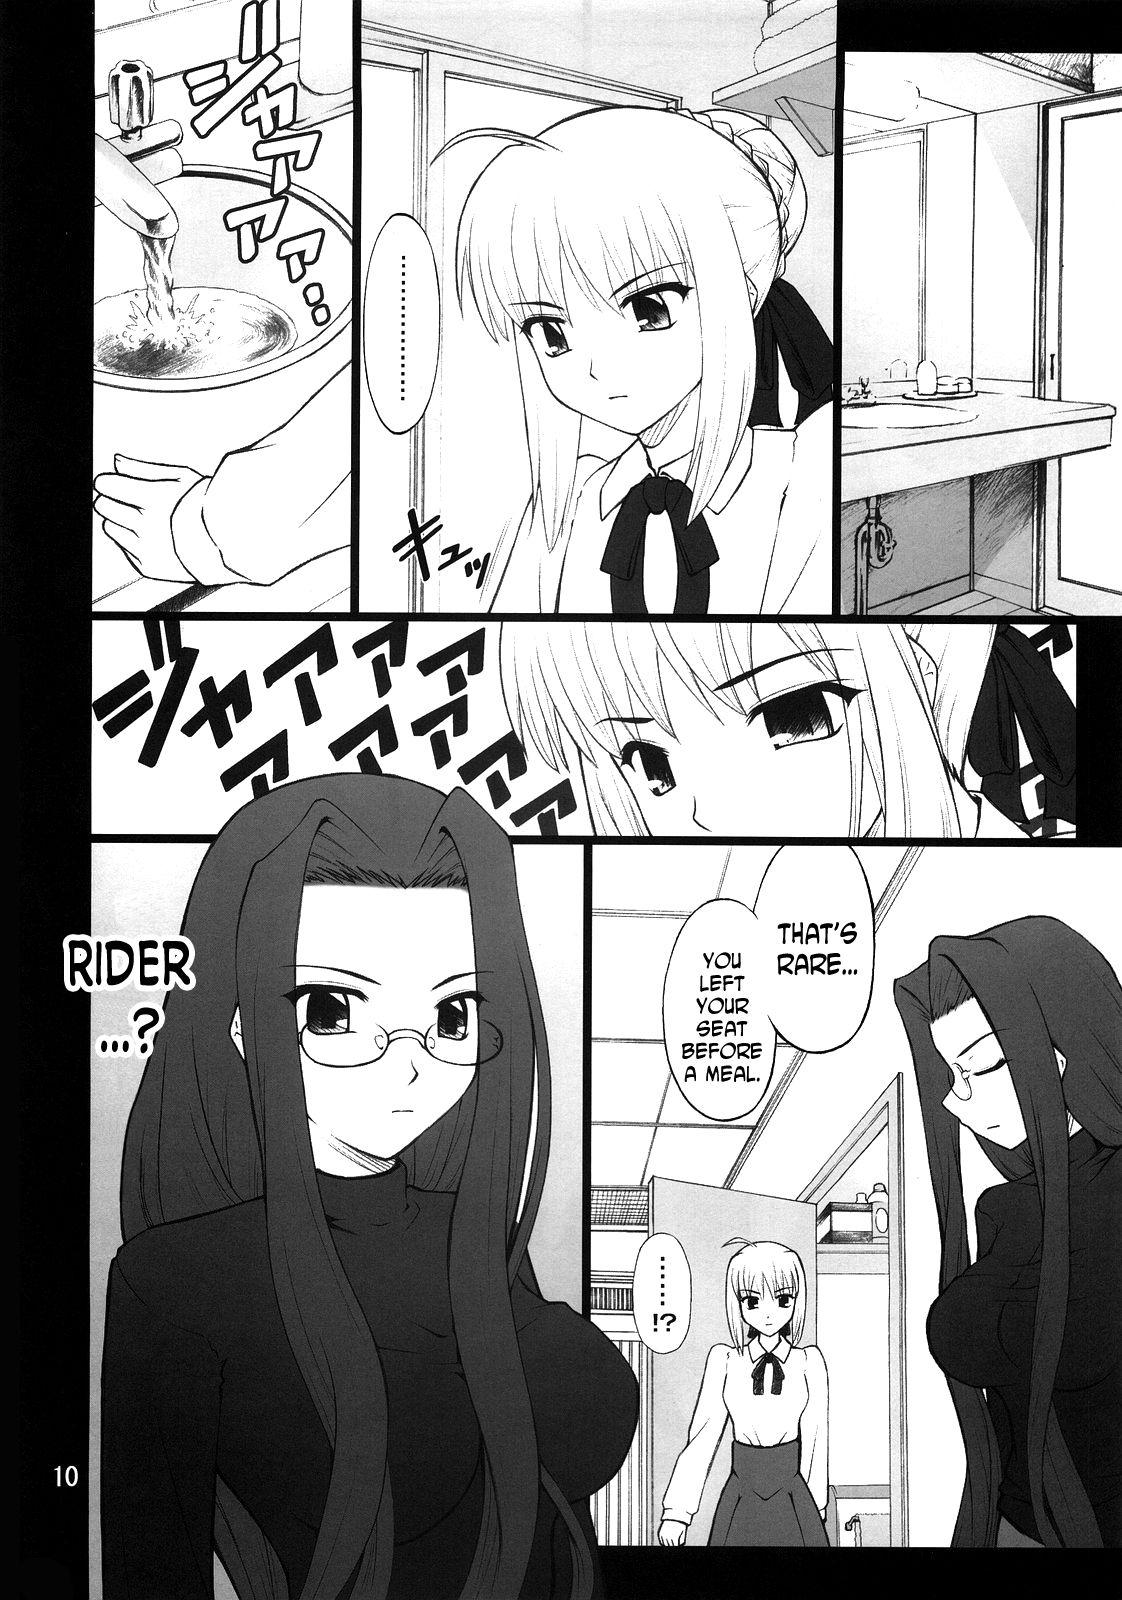 College Grem-Rin 2 - Fate stay night Bear - Page 9